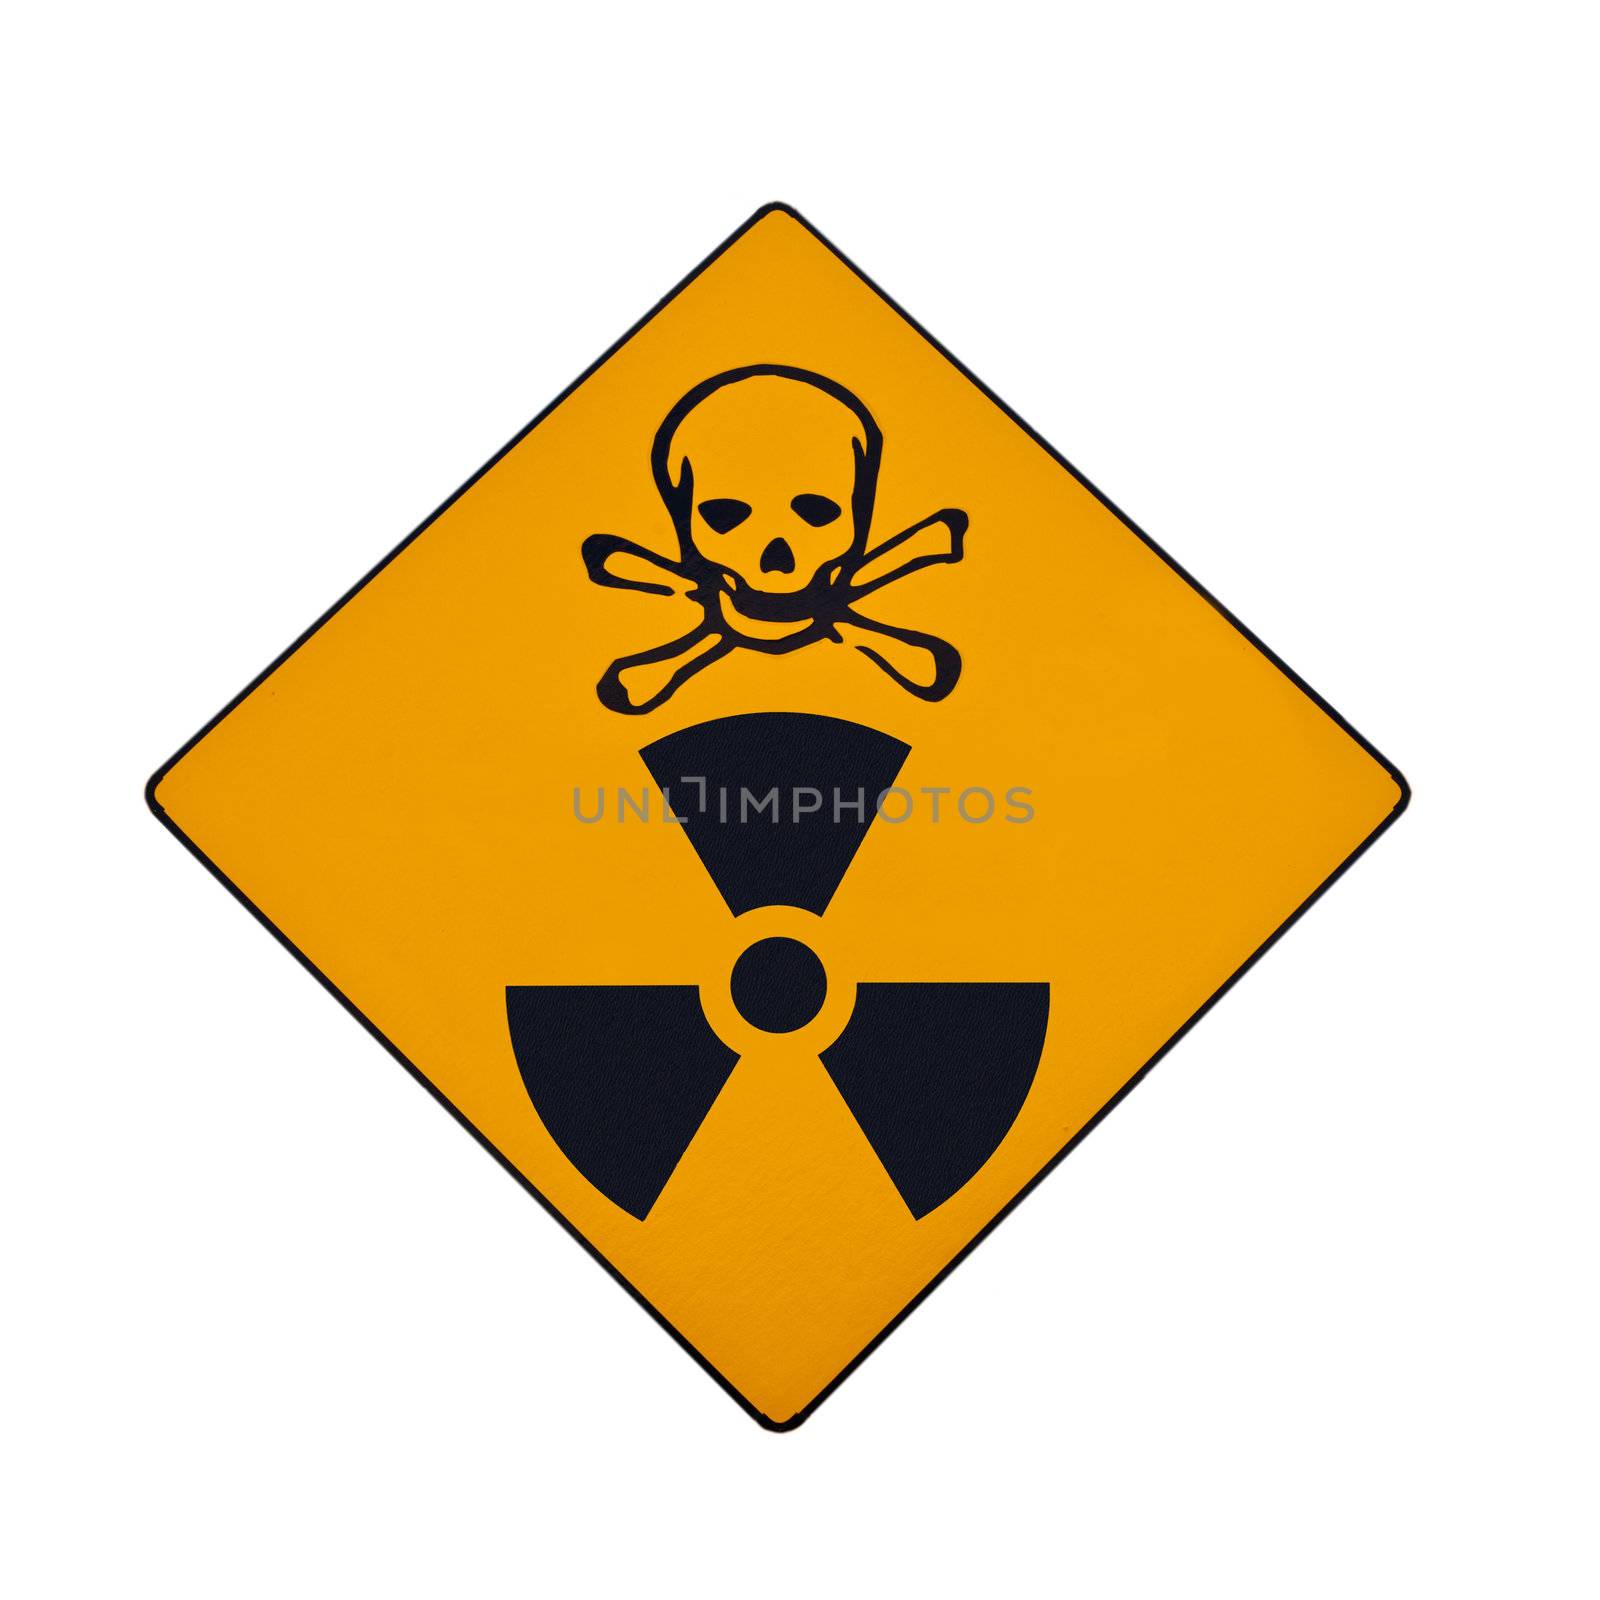 Deadly radiation warning sign, isolated by PiLens